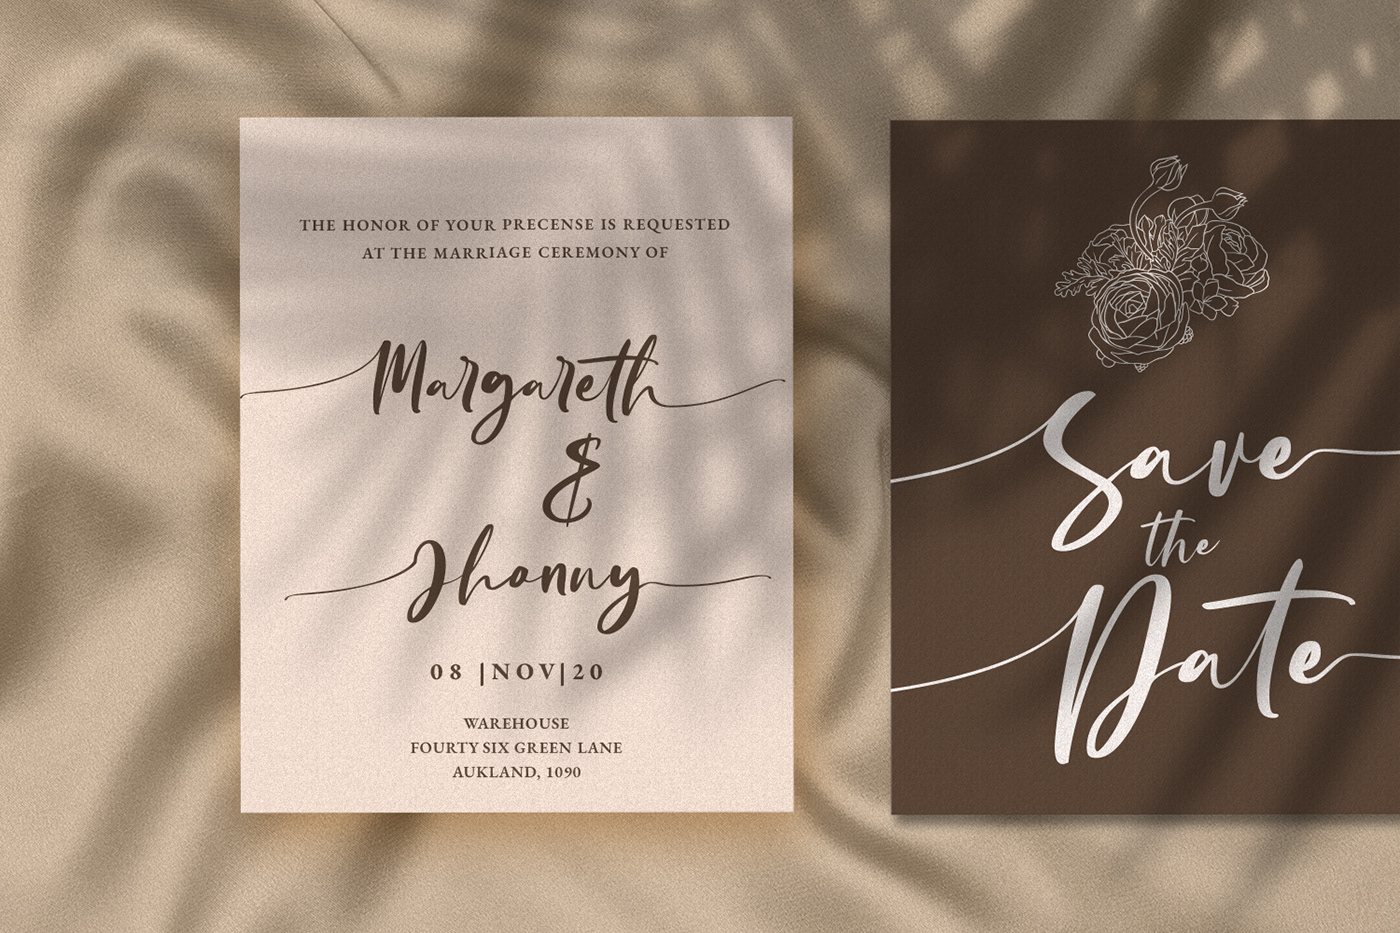 Calligraphy   Free font modern calligraphy modern font